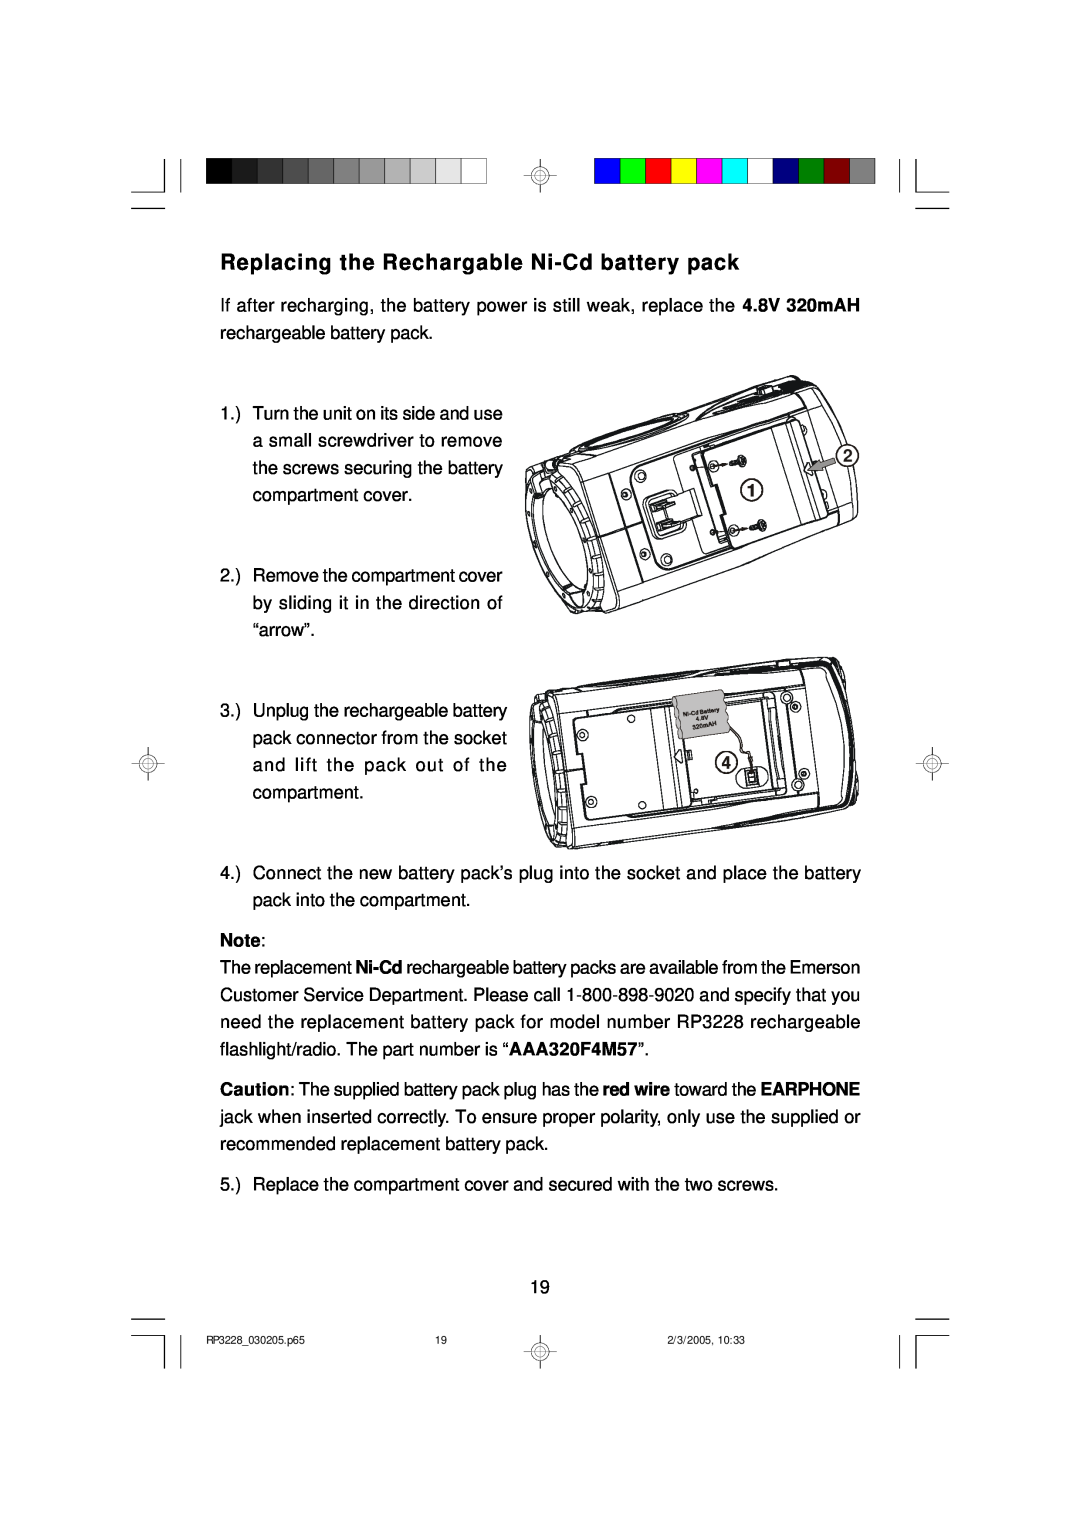 Emerson RP3228SL owner manual Replacing the Rechargable Ni-Cdbattery pack 